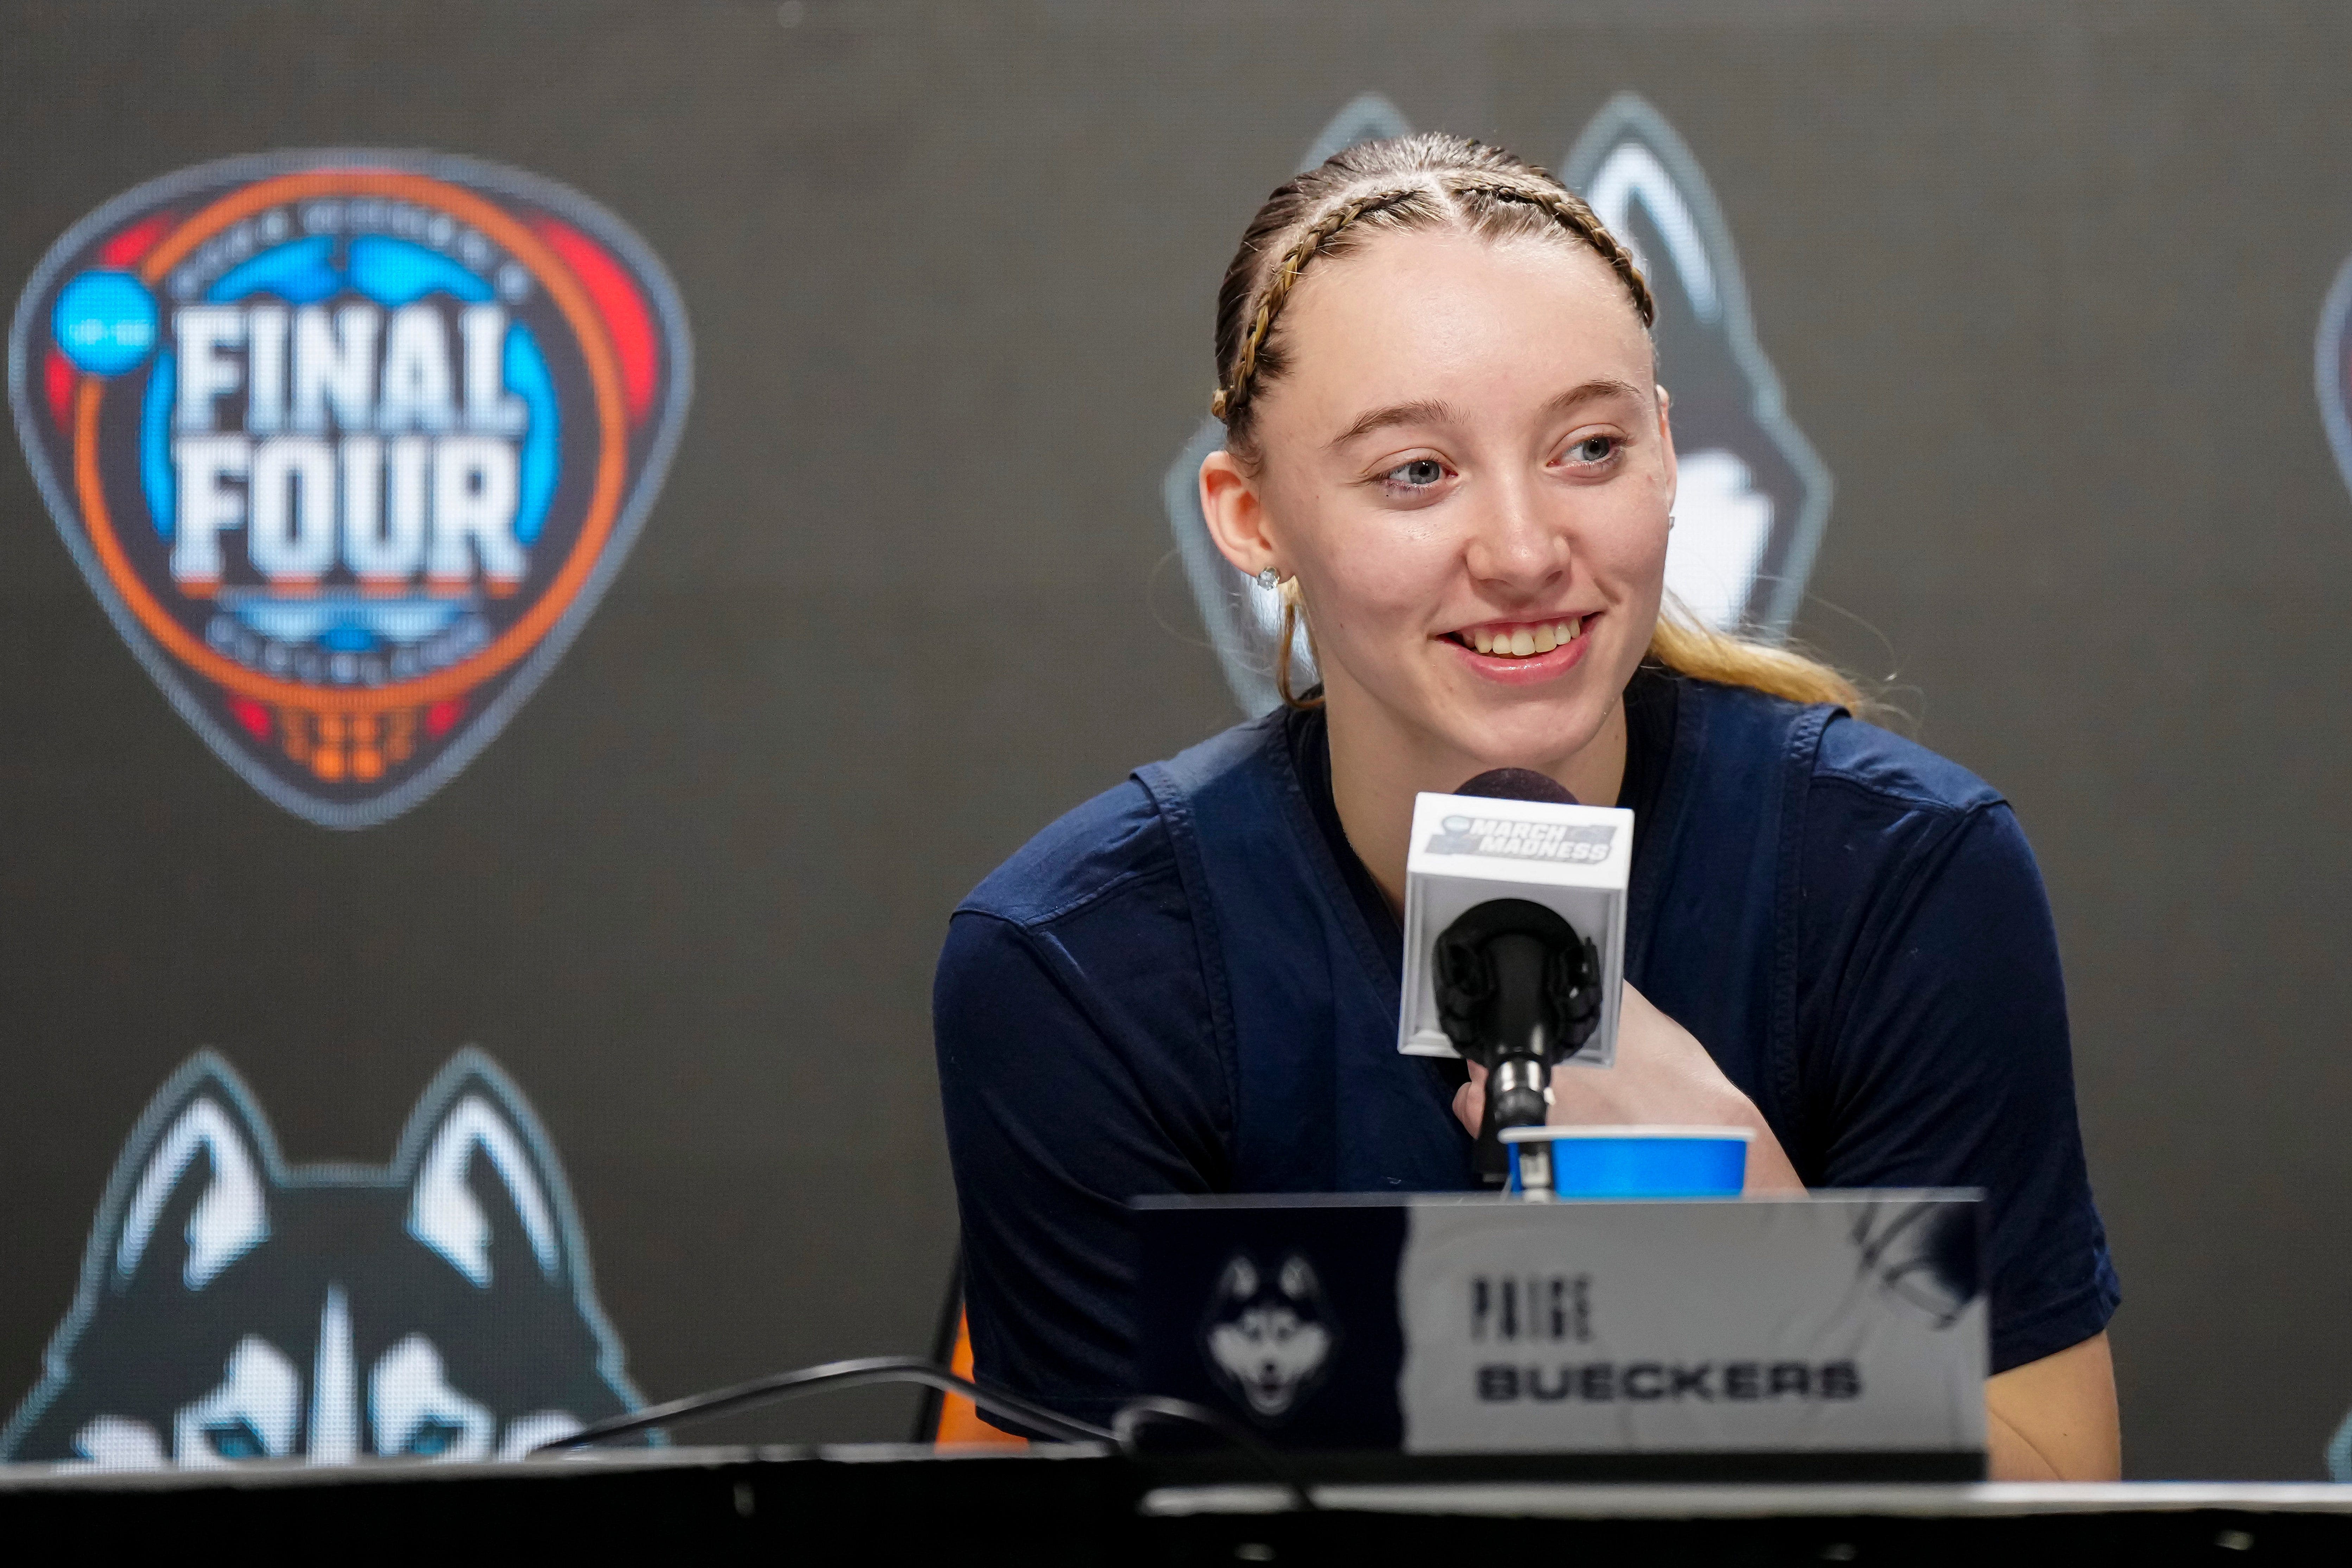 Paige Bueckers has a sweet new NIL deal with Breanna Stewart and Napheesa Collier's Unrivaled basketball league